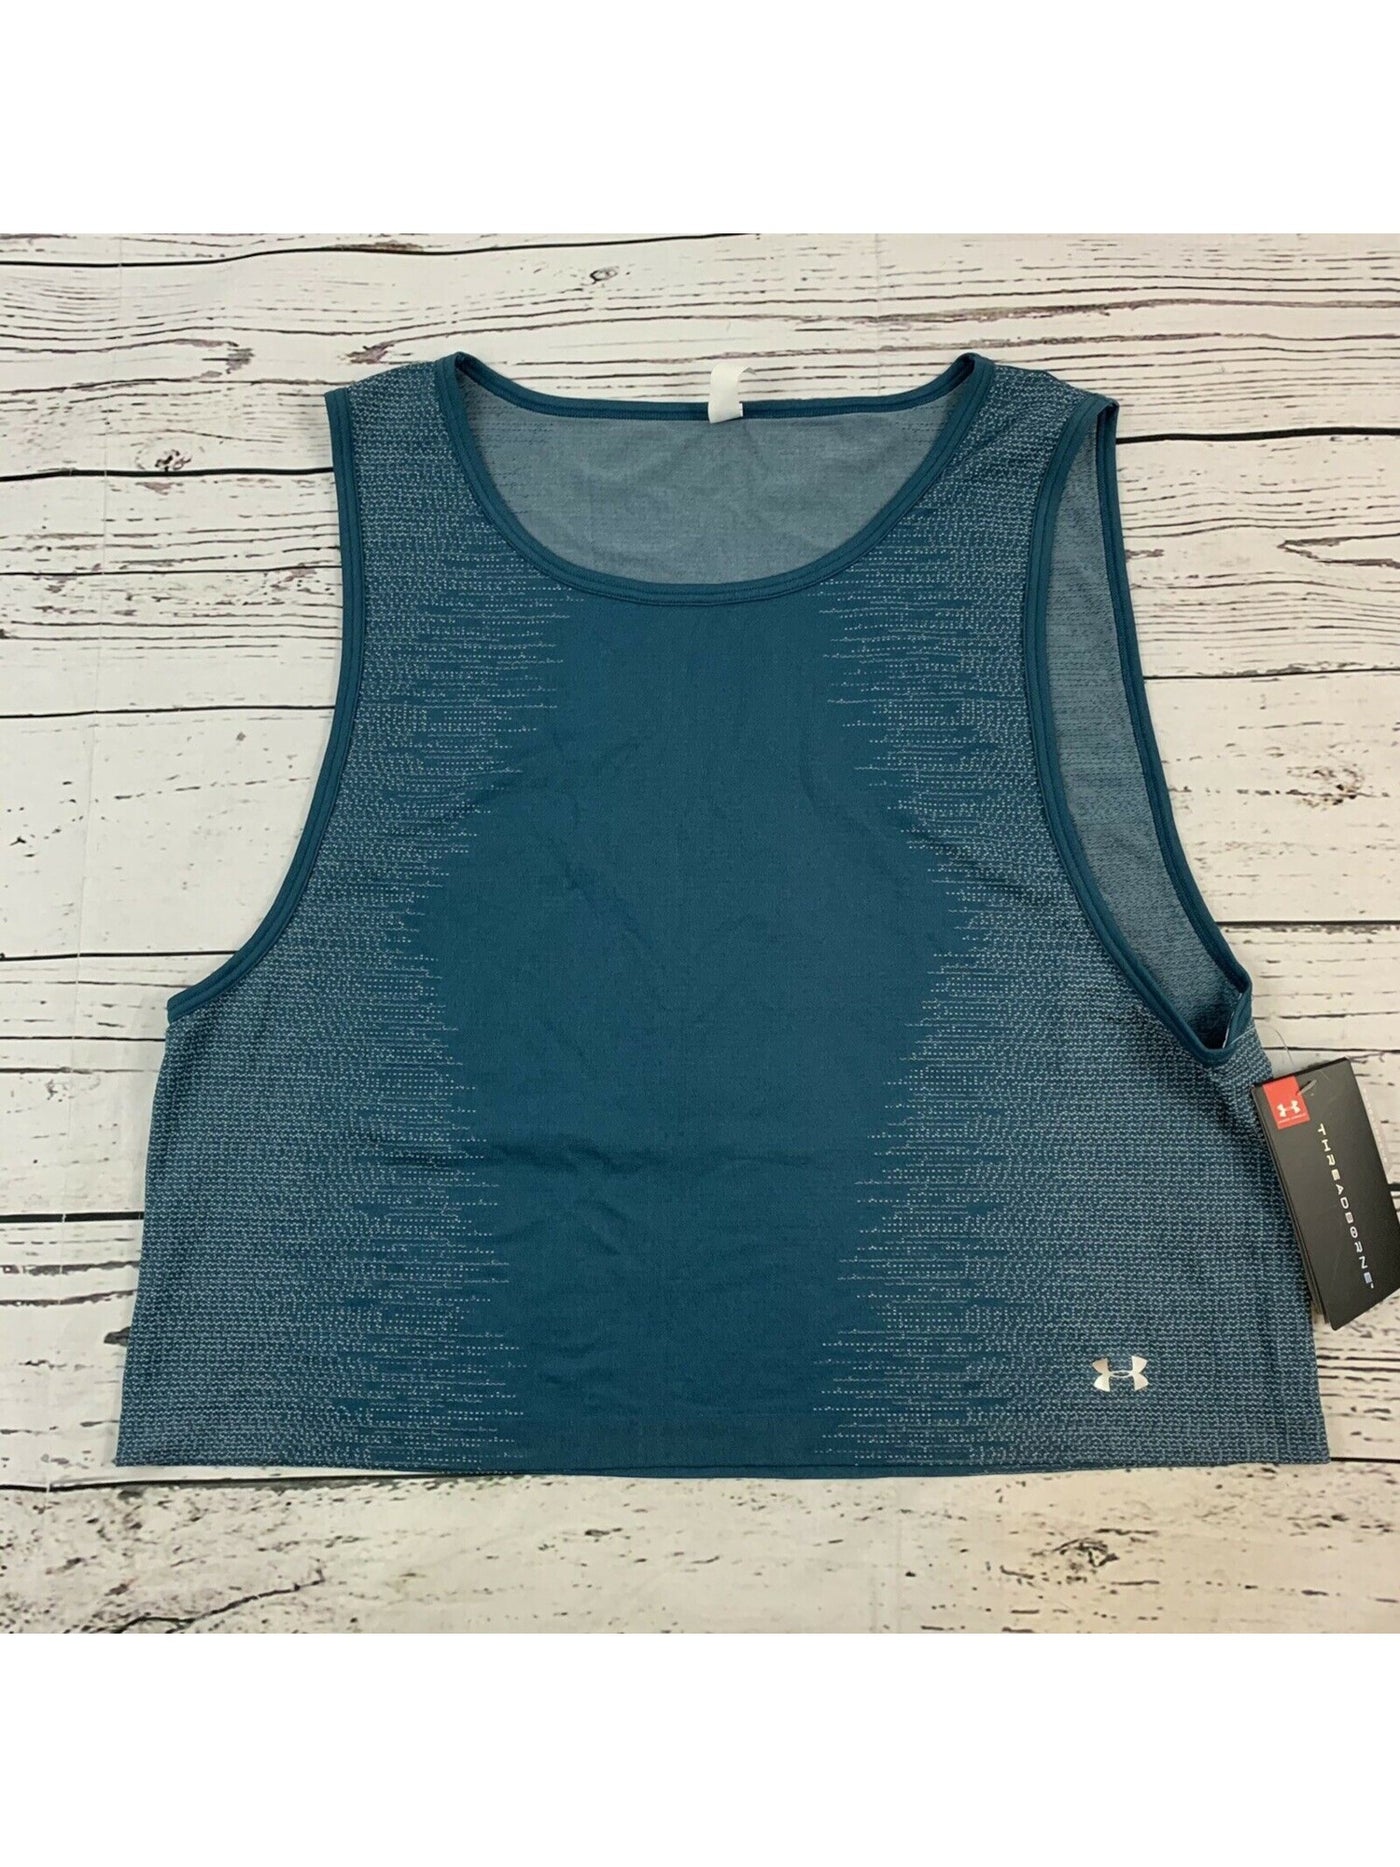 UNDER ARMOUR Womens Blue Printed Sleeveless Scoop Neck Tank Top Size: XL